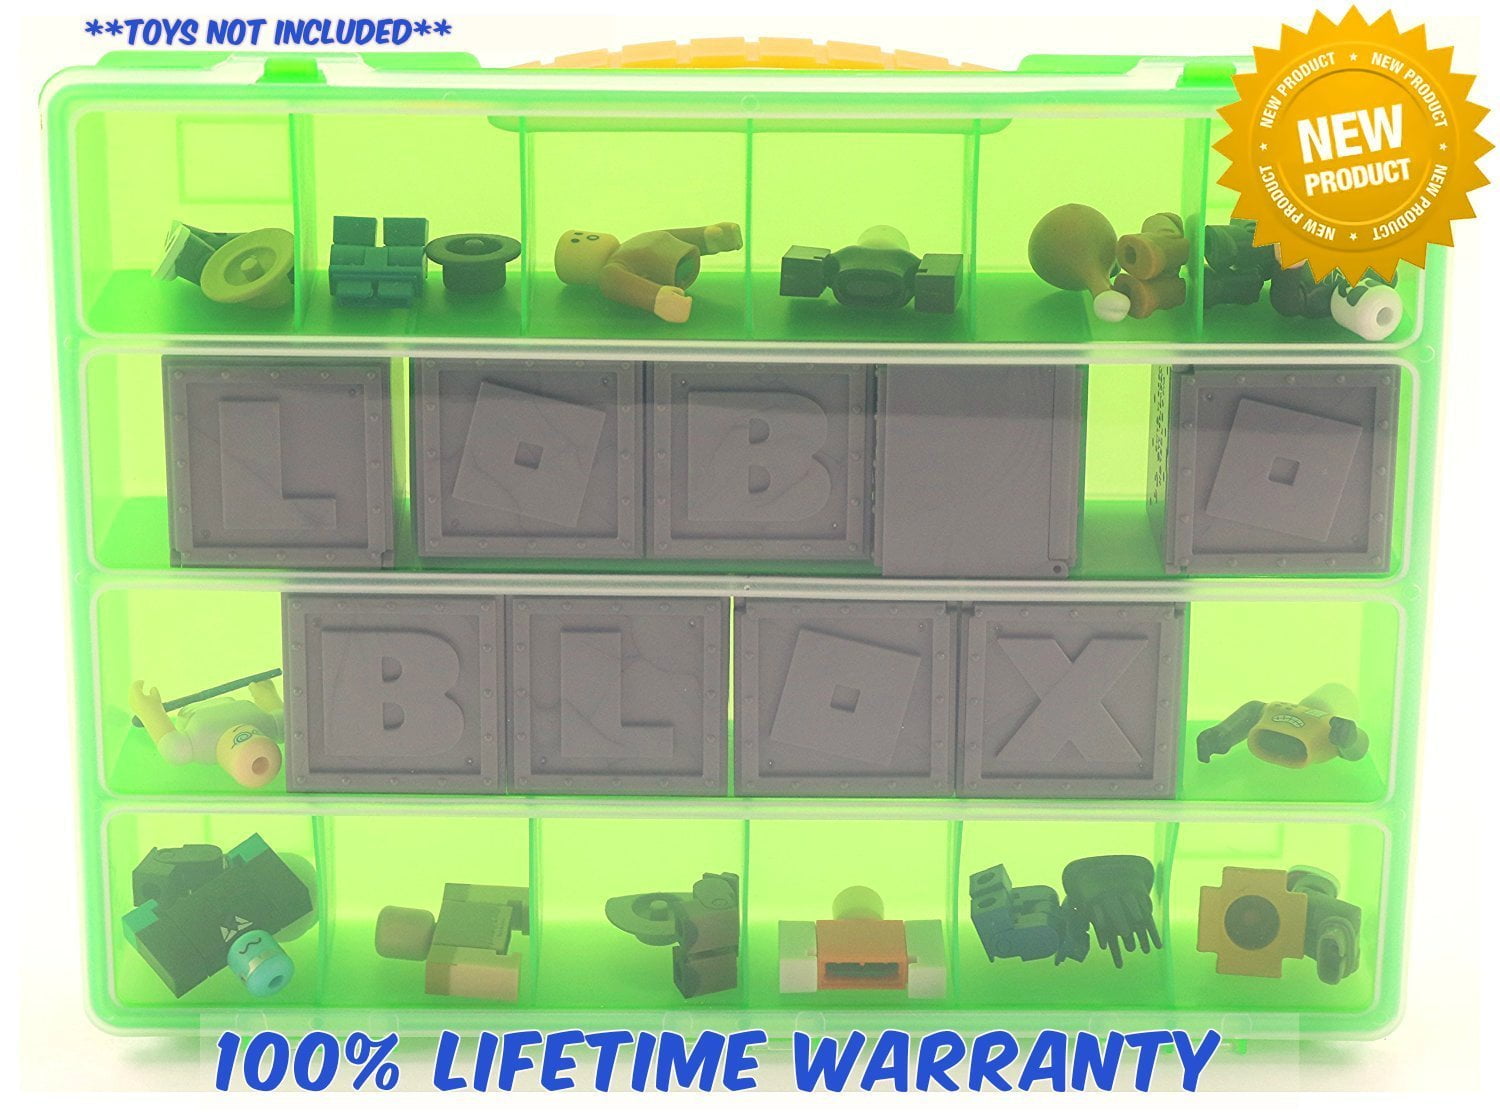 Roblox Carrying Case Stores Dozens Of Figures Durable Toy Storage Organizers By Life Made Better Green Walmart Com Walmart Com - storage box roblox